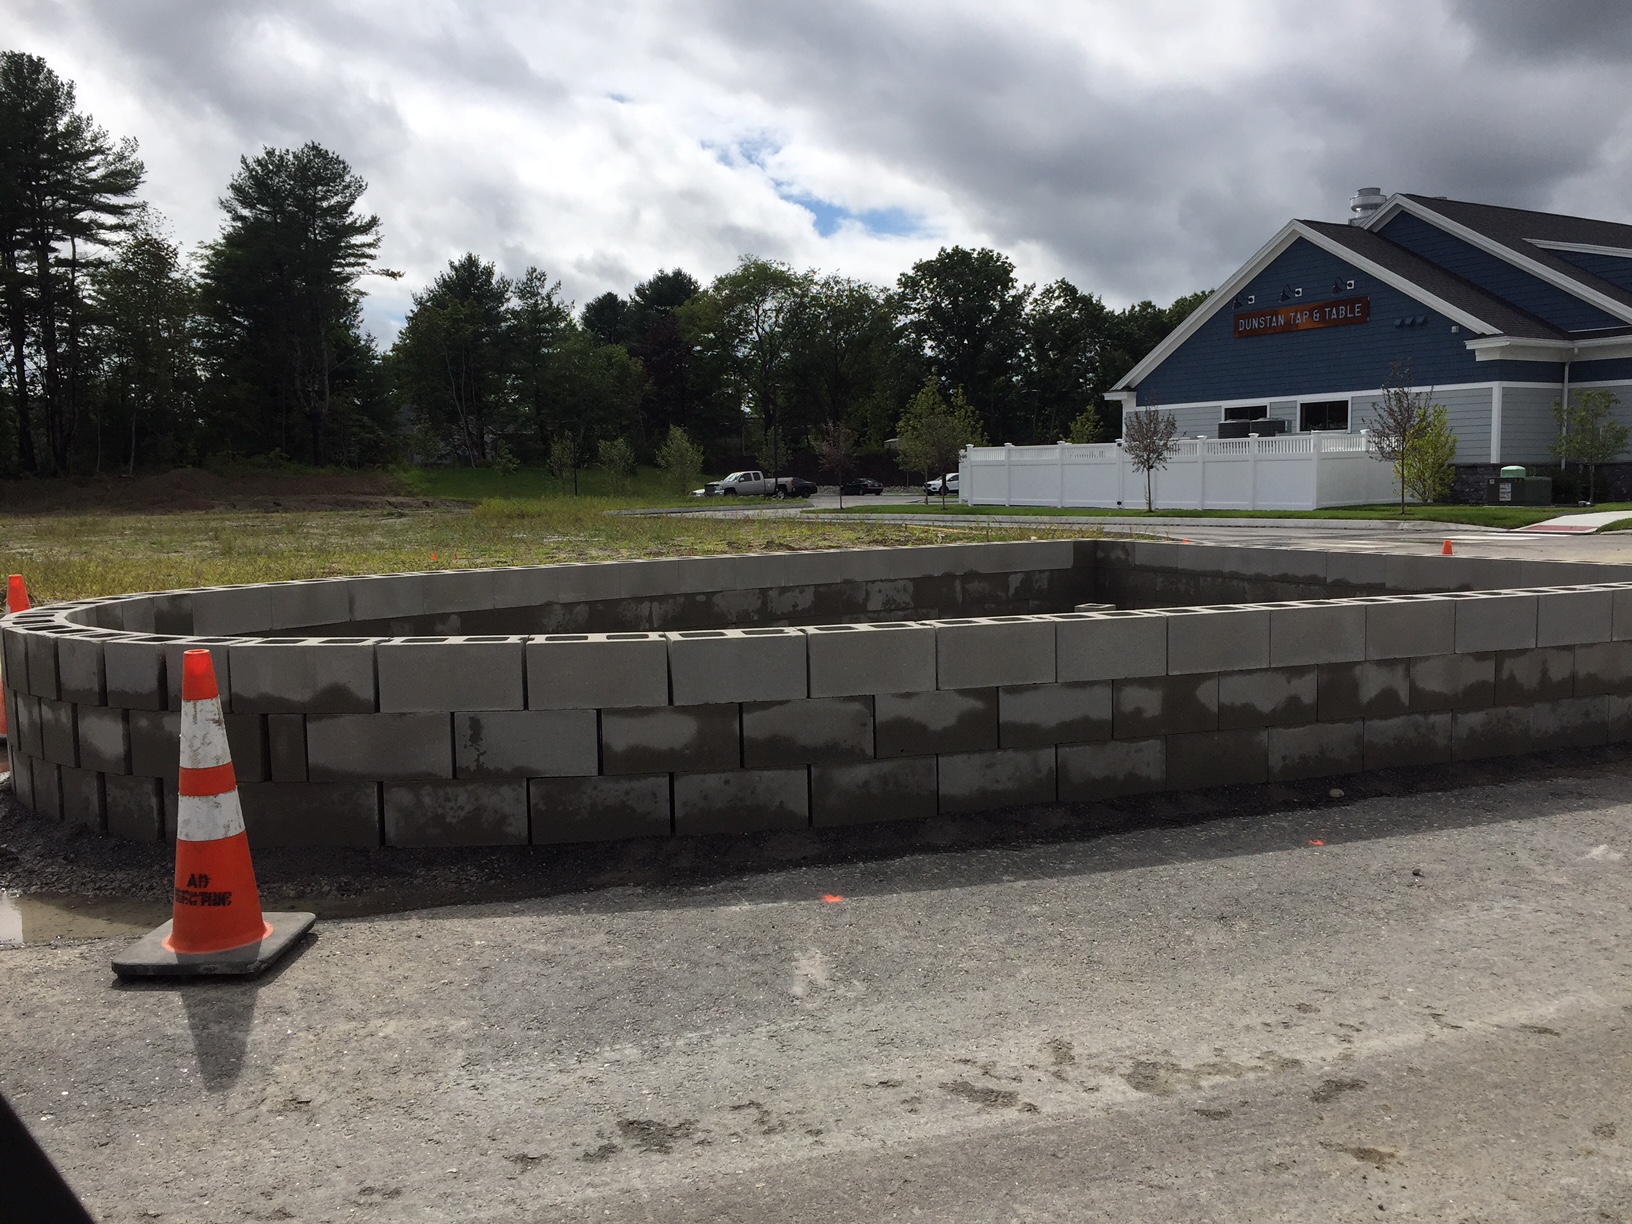 Dunstan Tap and Table Restaurant Scarborough Maine Stone Hardscape Wall